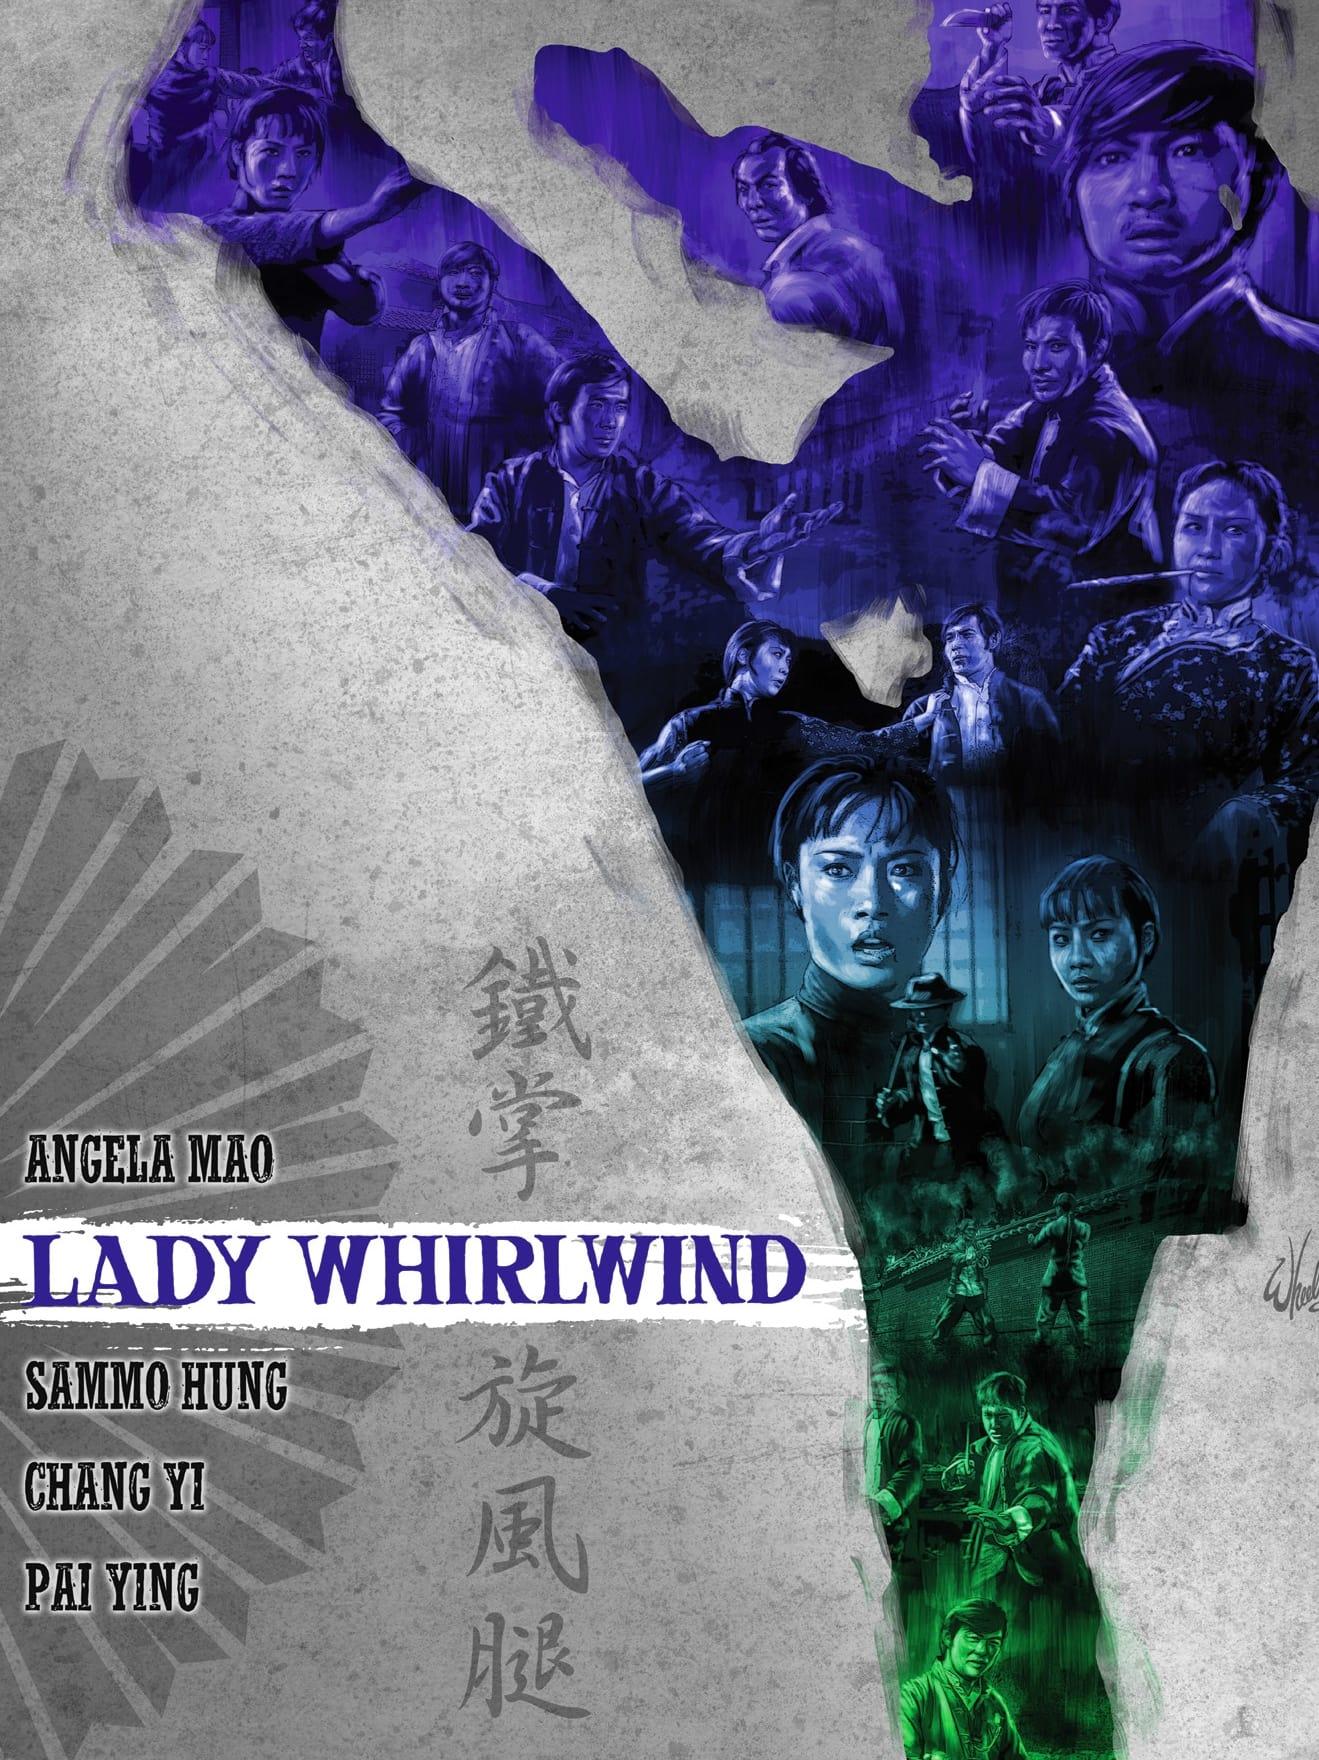 Lady Whirlwind poster